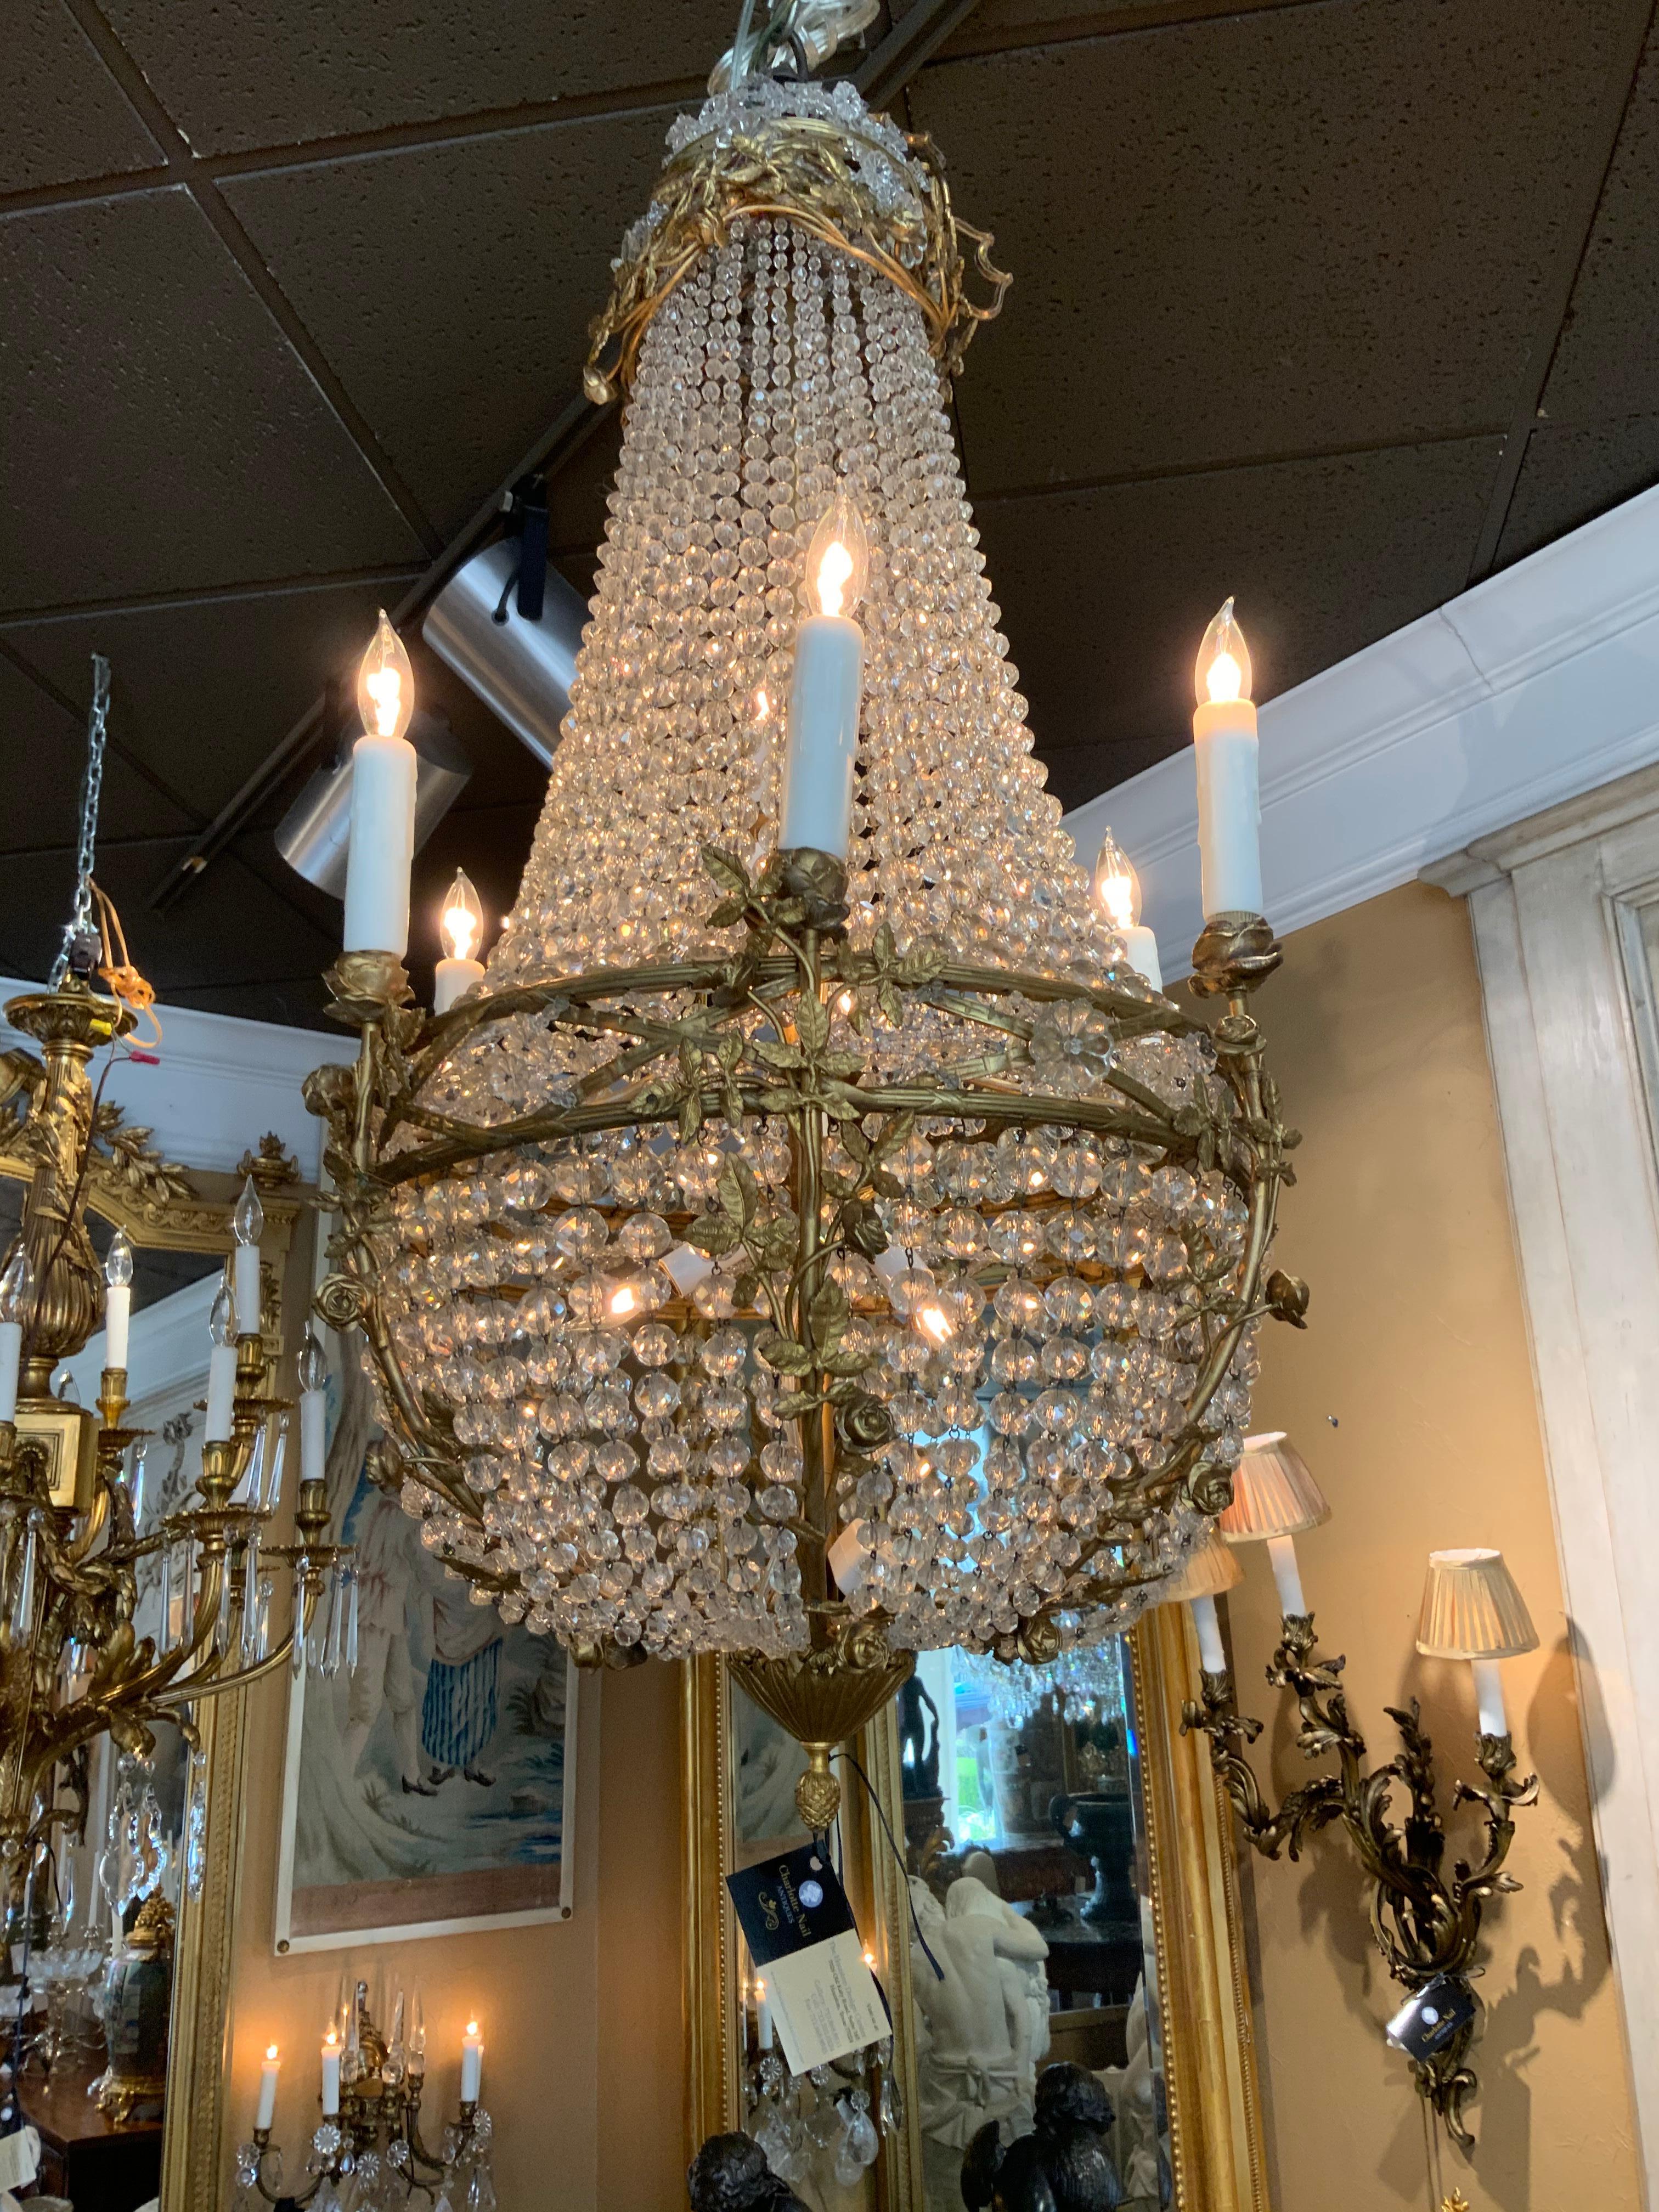 French sac de pearl empire style chandelier with crystal beads and bronze dore floral decorations,
Ending in an acorn finial.